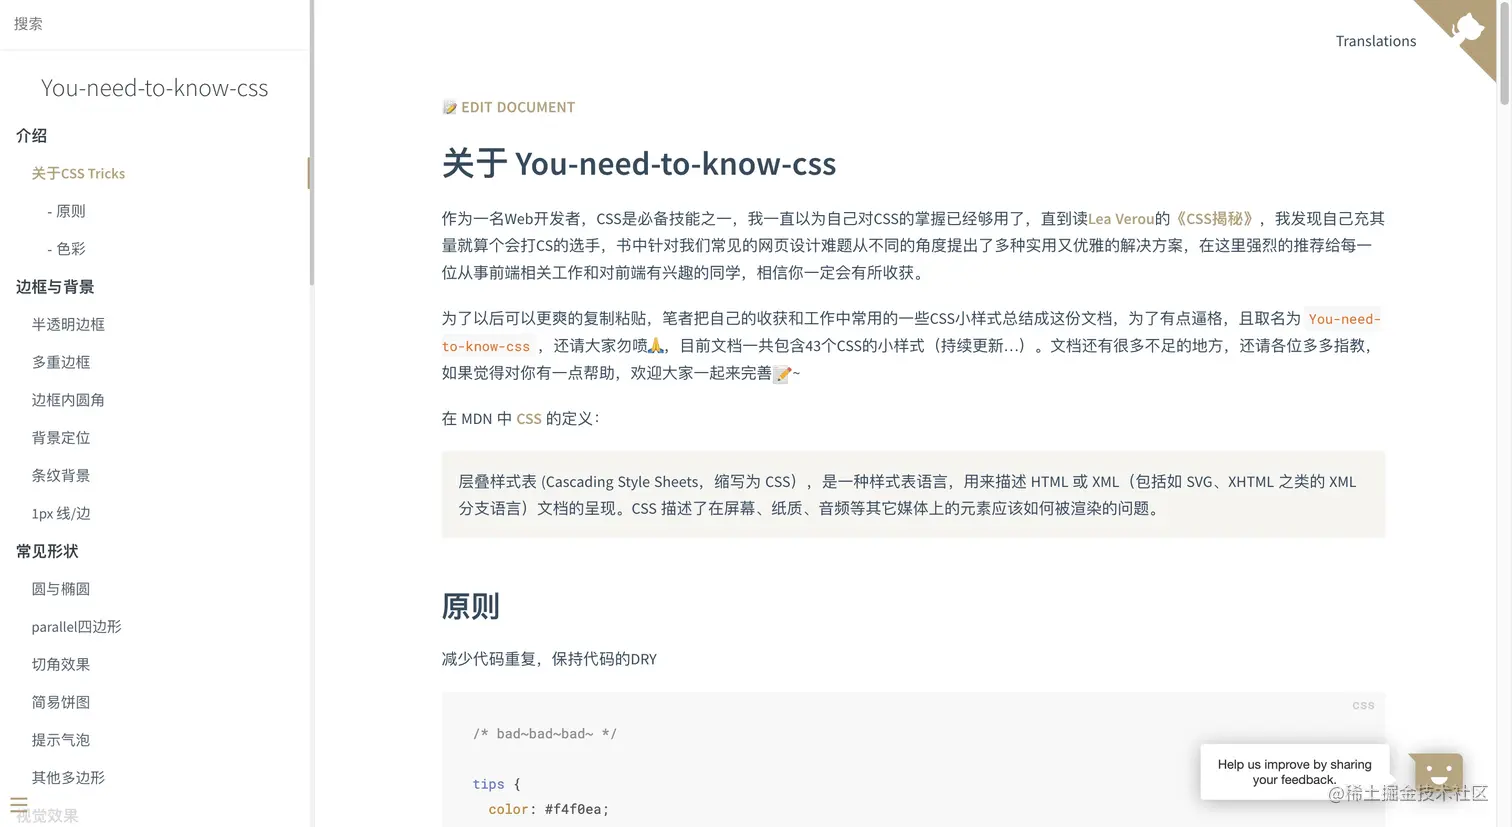 https-::lhammer.cn:You-need-to-know-css.jpg